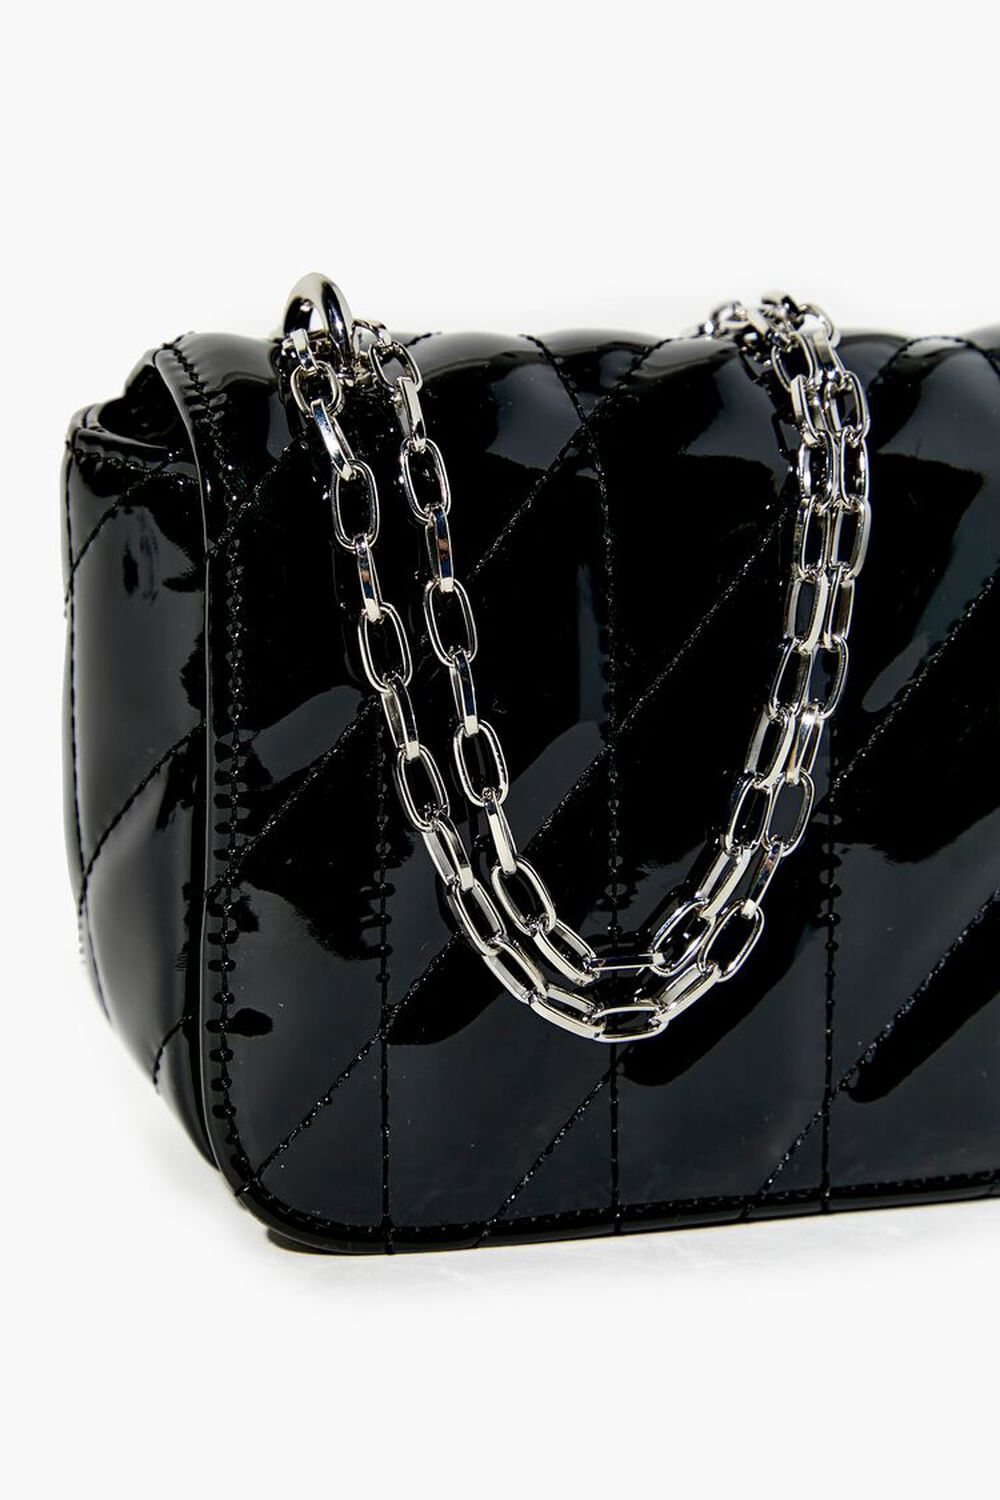 BLACK Faux Patent Leather Quilted Crossbody Bag, image 3